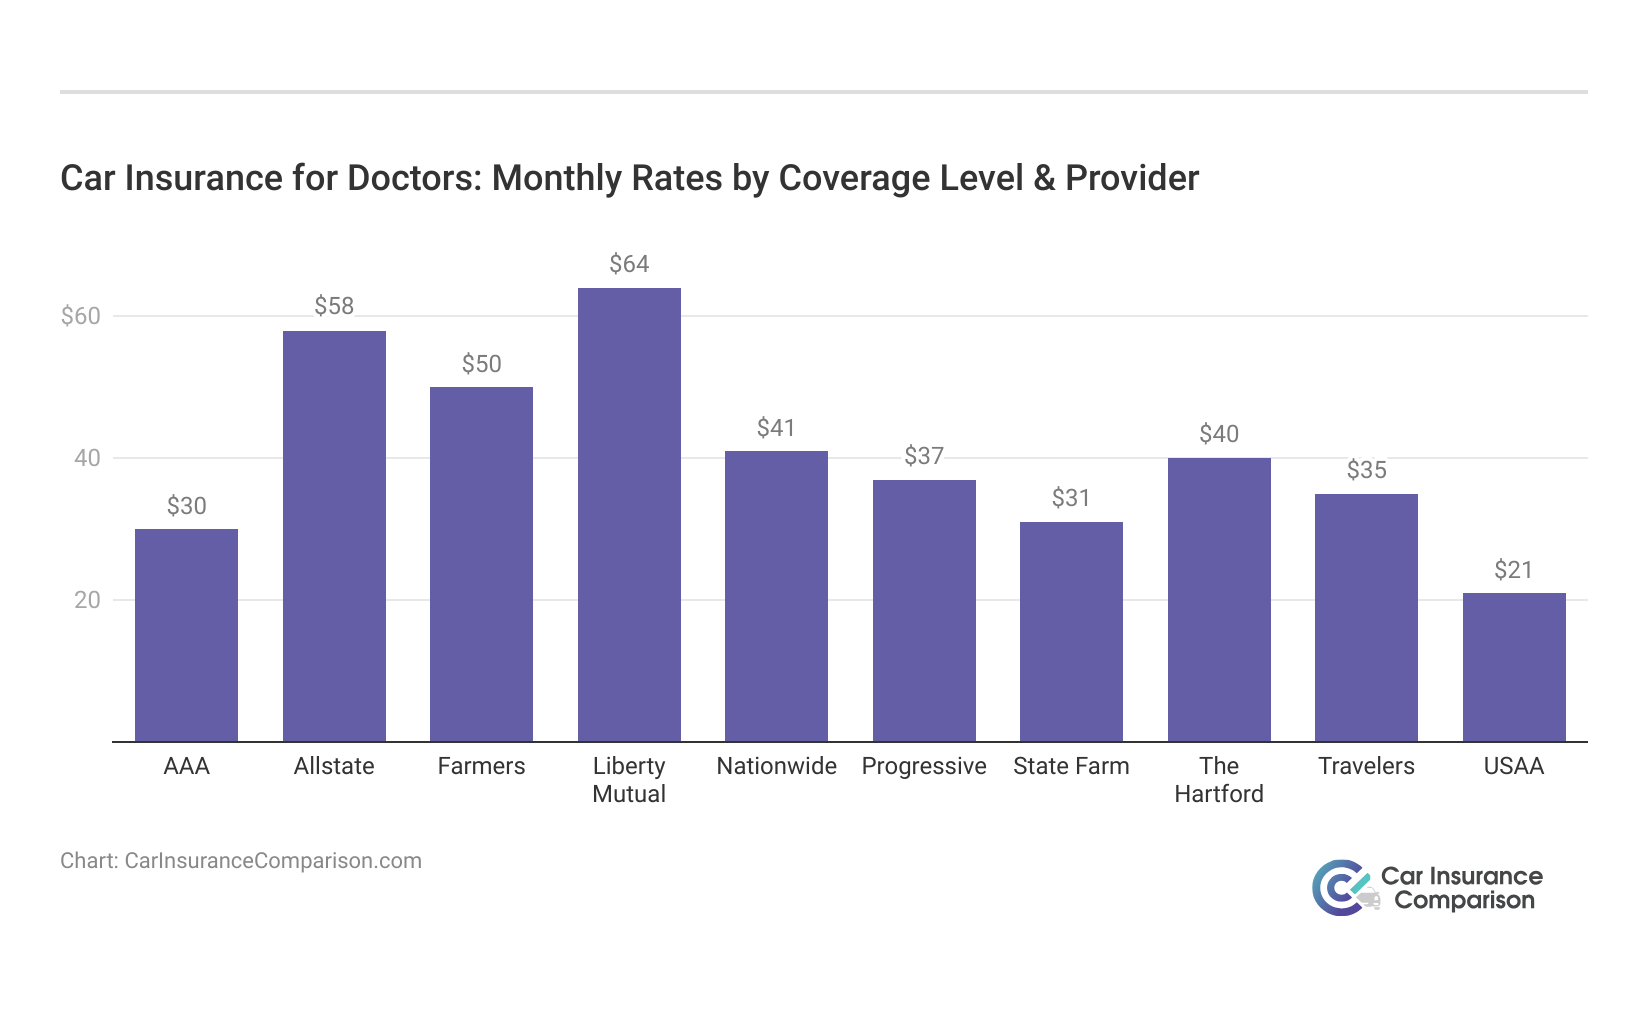 <h3>Car Insurance for Doctors: Monthly Rates by Coverage Level & Provider</h3>